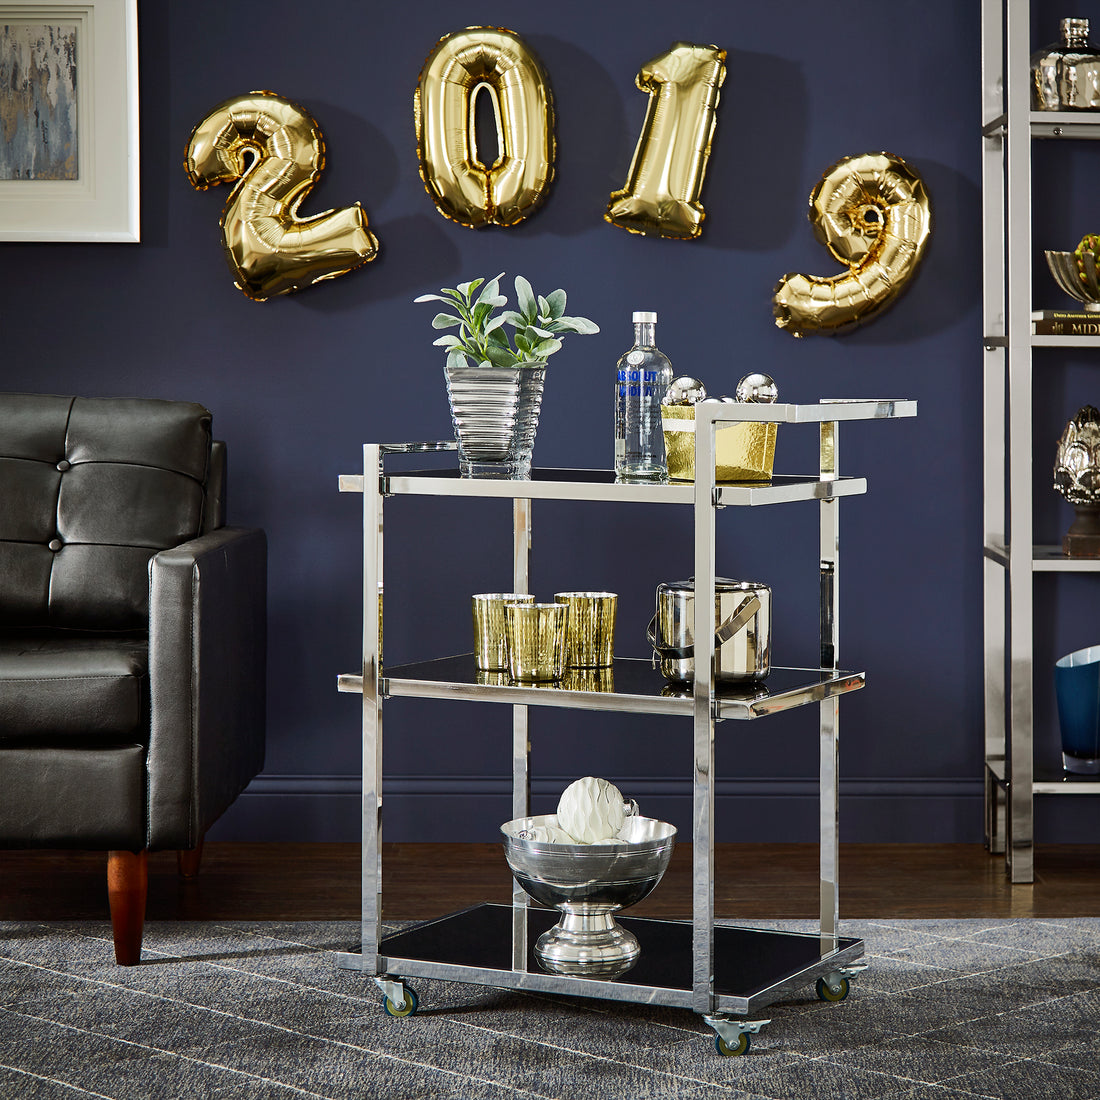 Decorating Your Bar Cart for New Year's